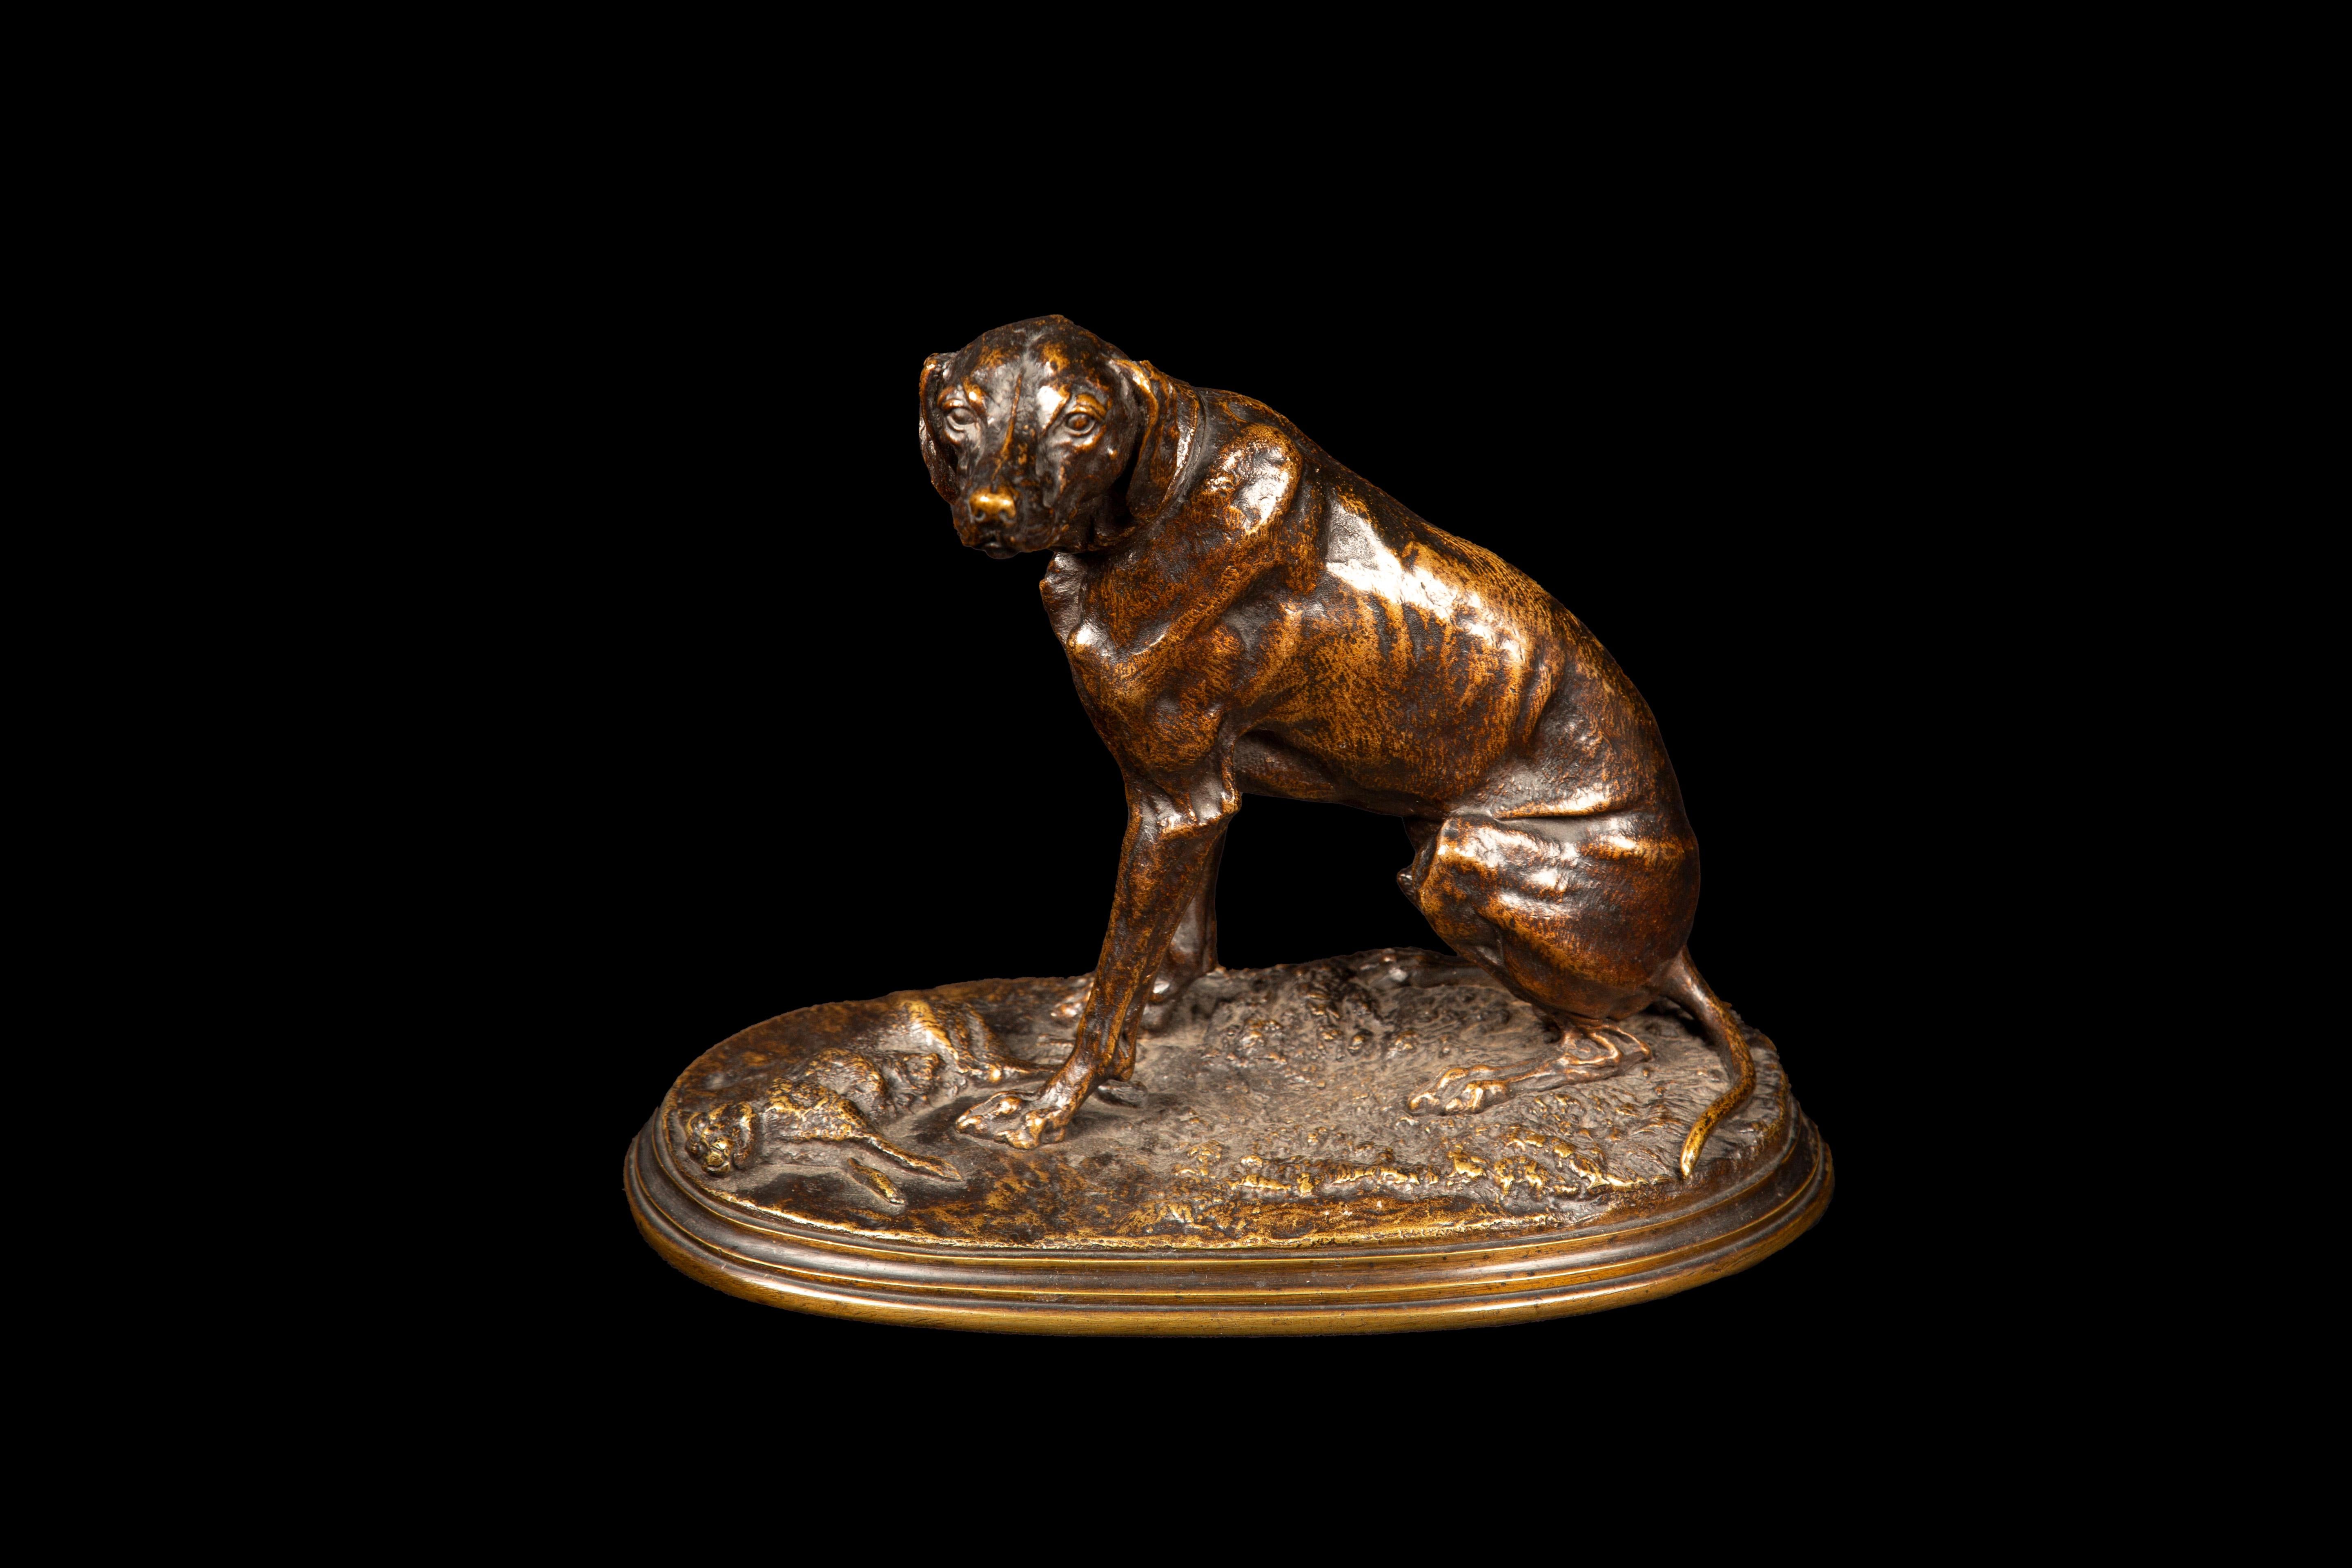 This sculpture, crafted from patinated bronze, is a remarkable representation of a hunting scene from history. It depicts a hunting dog triumphantly standing next to its prize, capturing a moment of intensity and success in the hunt.

The use of